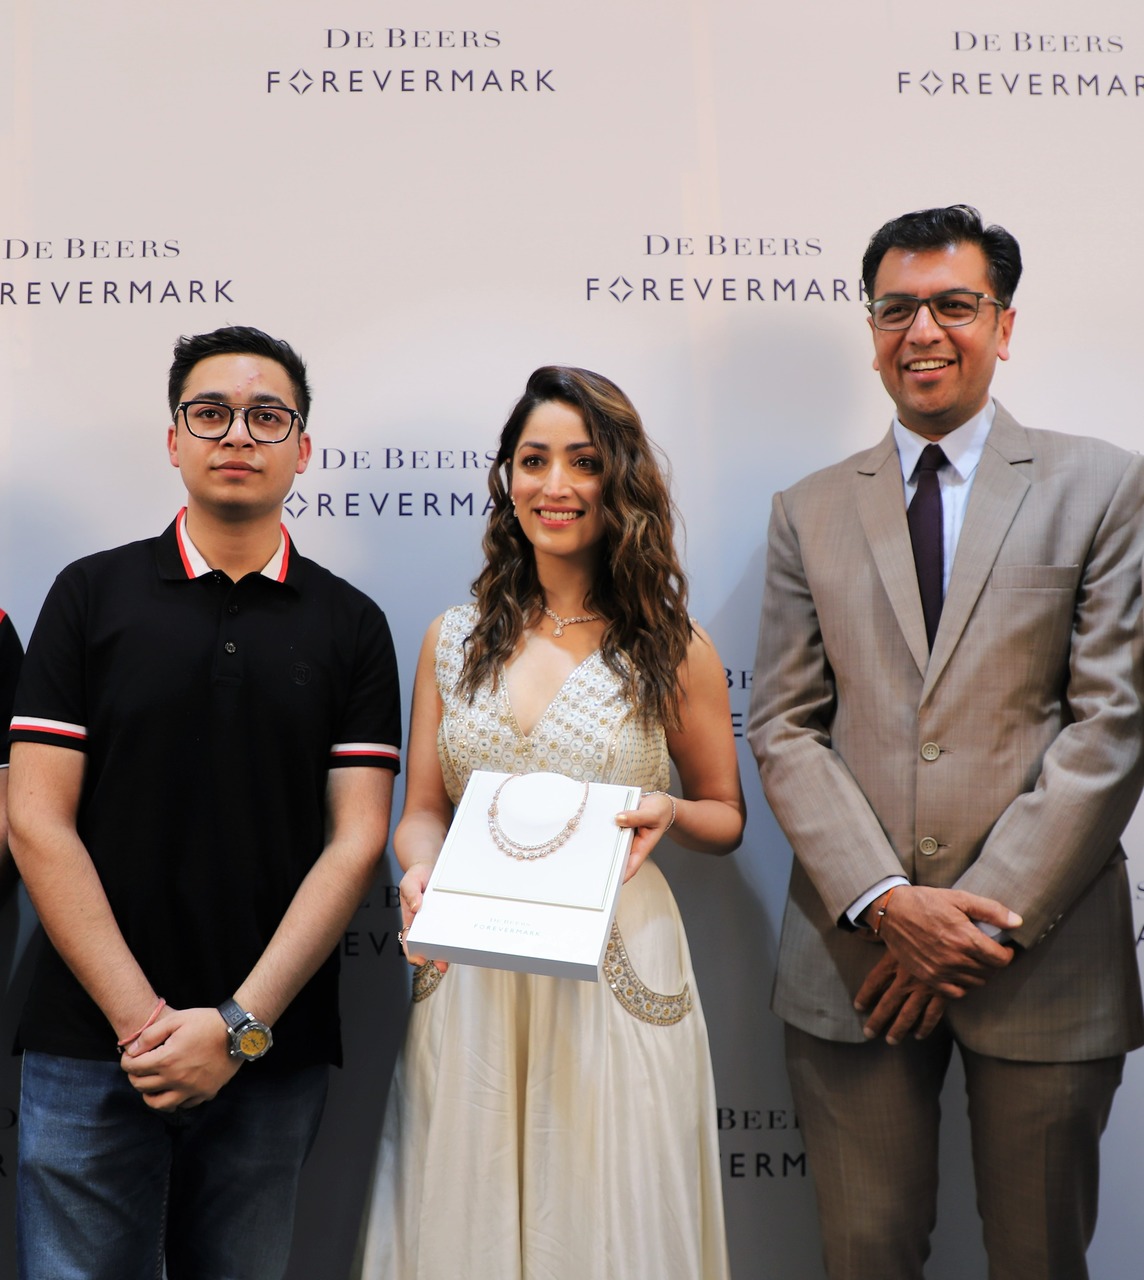 De Beers announces launch of Forevermark Avaanti collection